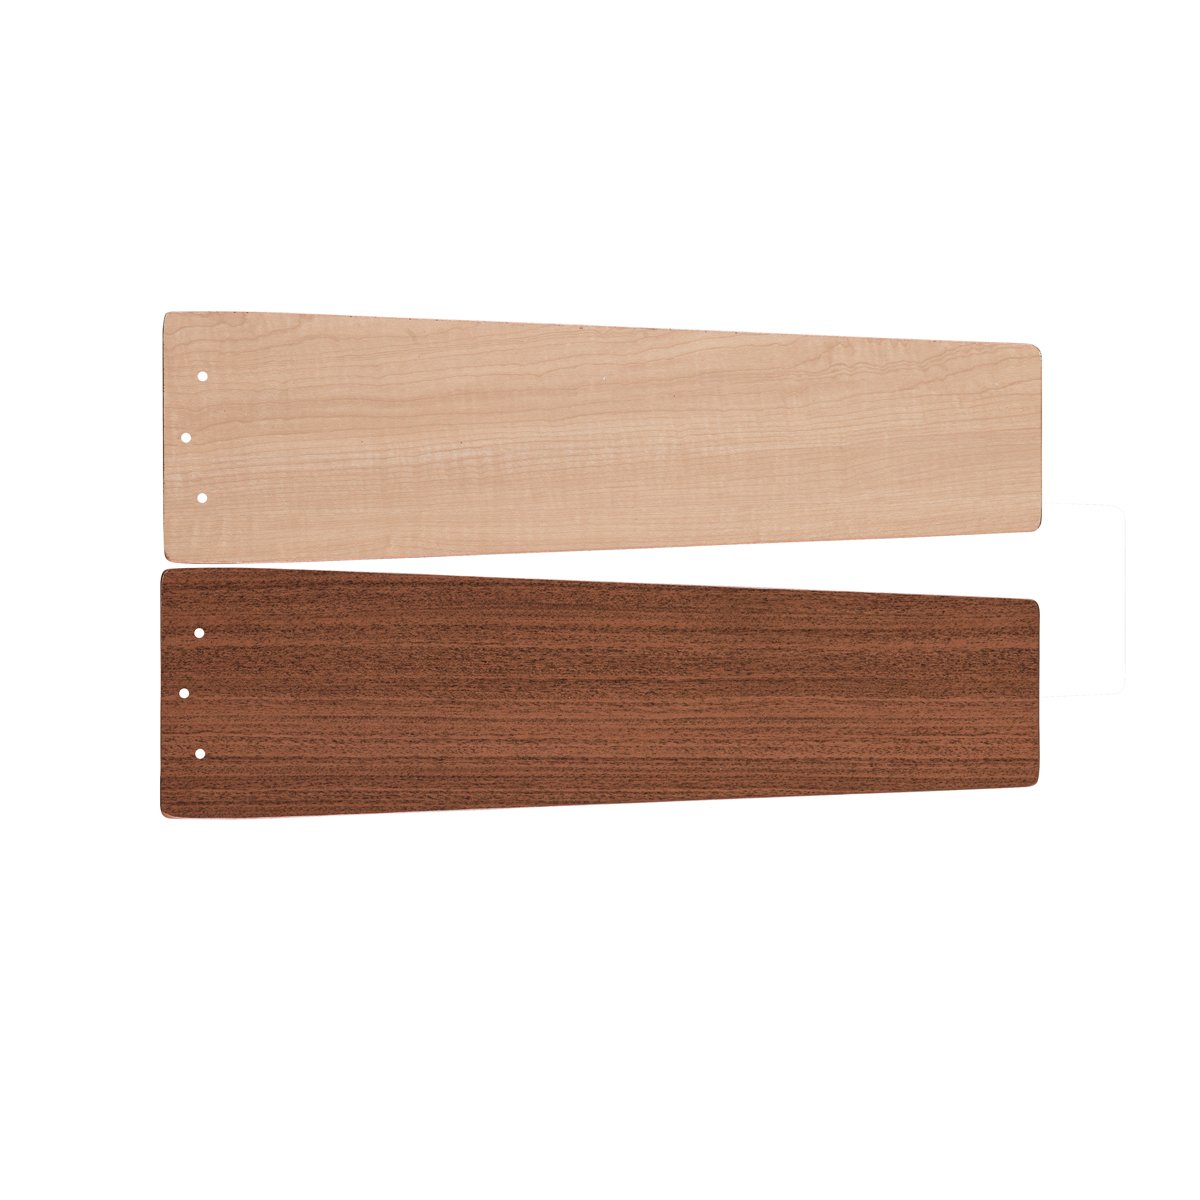 Enhance your styling with this 38 inch Ply Blade for Arkwright(TM) . Featuring a beautiful Polished Nickel finish, this accessory will effortlessly blend in any setting.